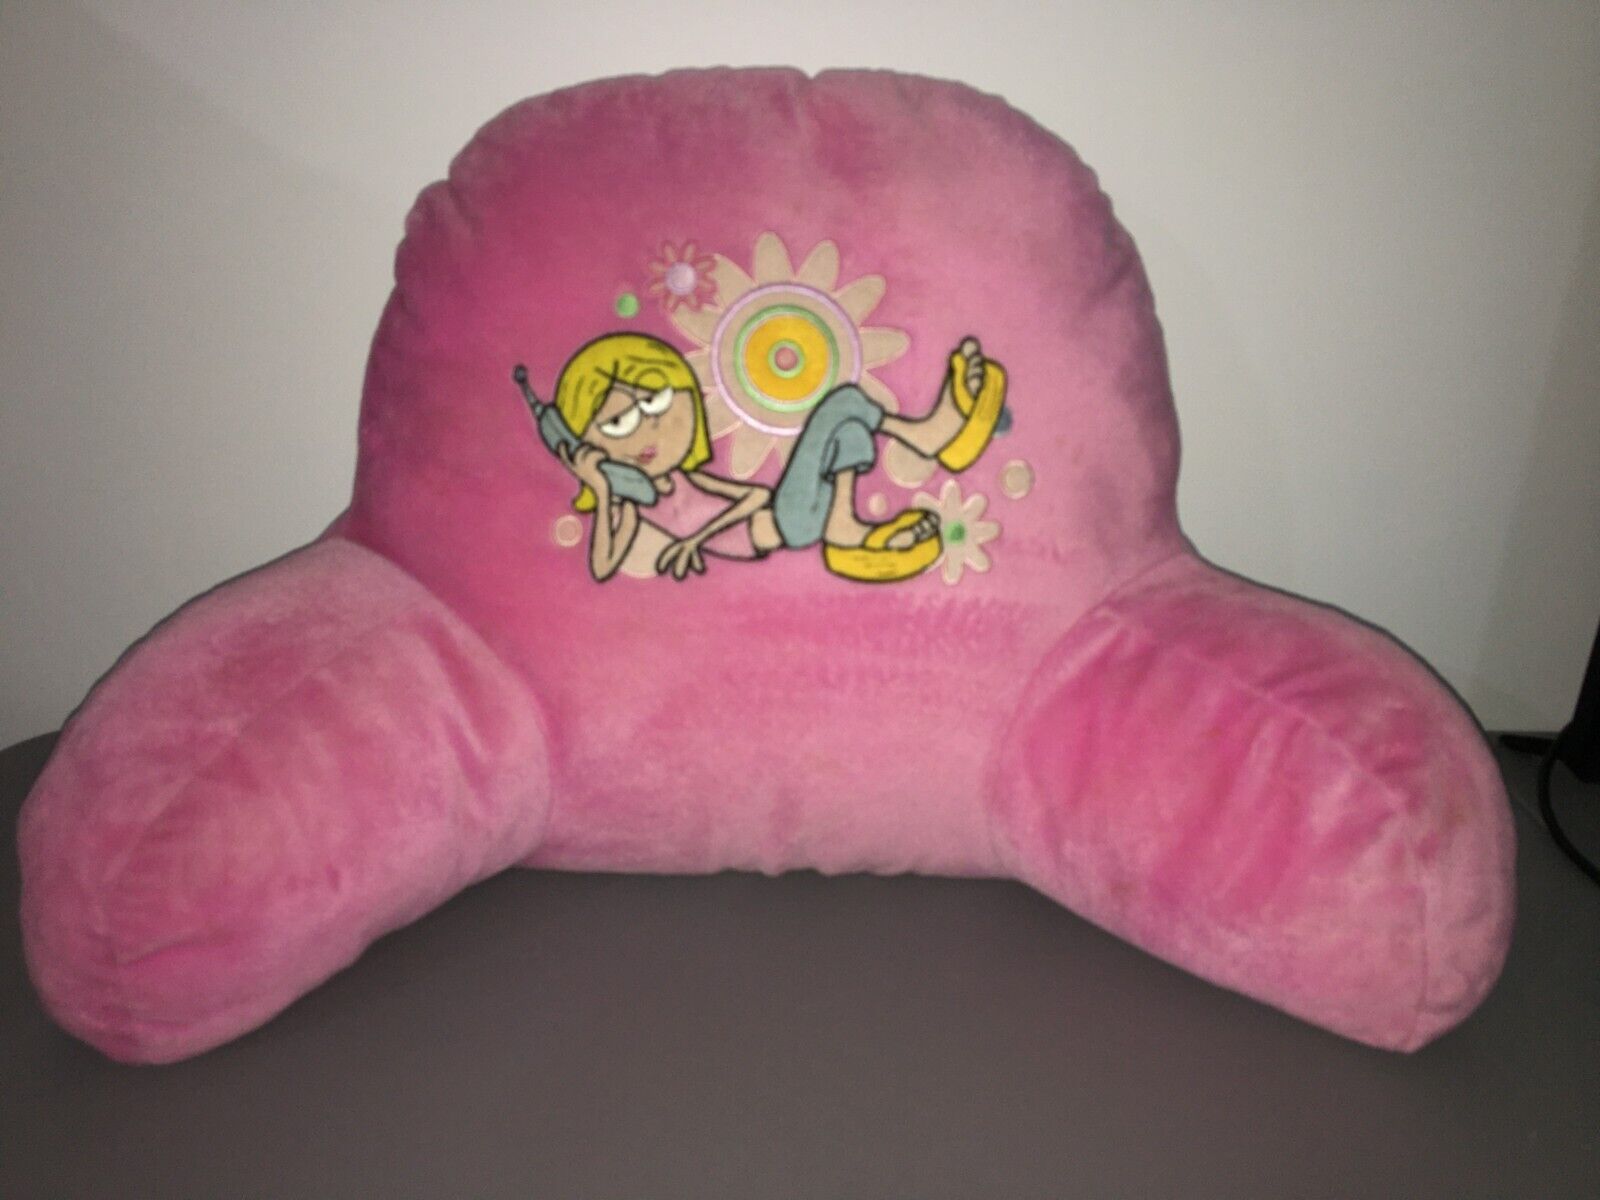 DISNEY LIZZIE MCGUIRE EMBROIDERED PILLOW MEGA RARE VINTAGE COLLECTIBLE LAST ONE